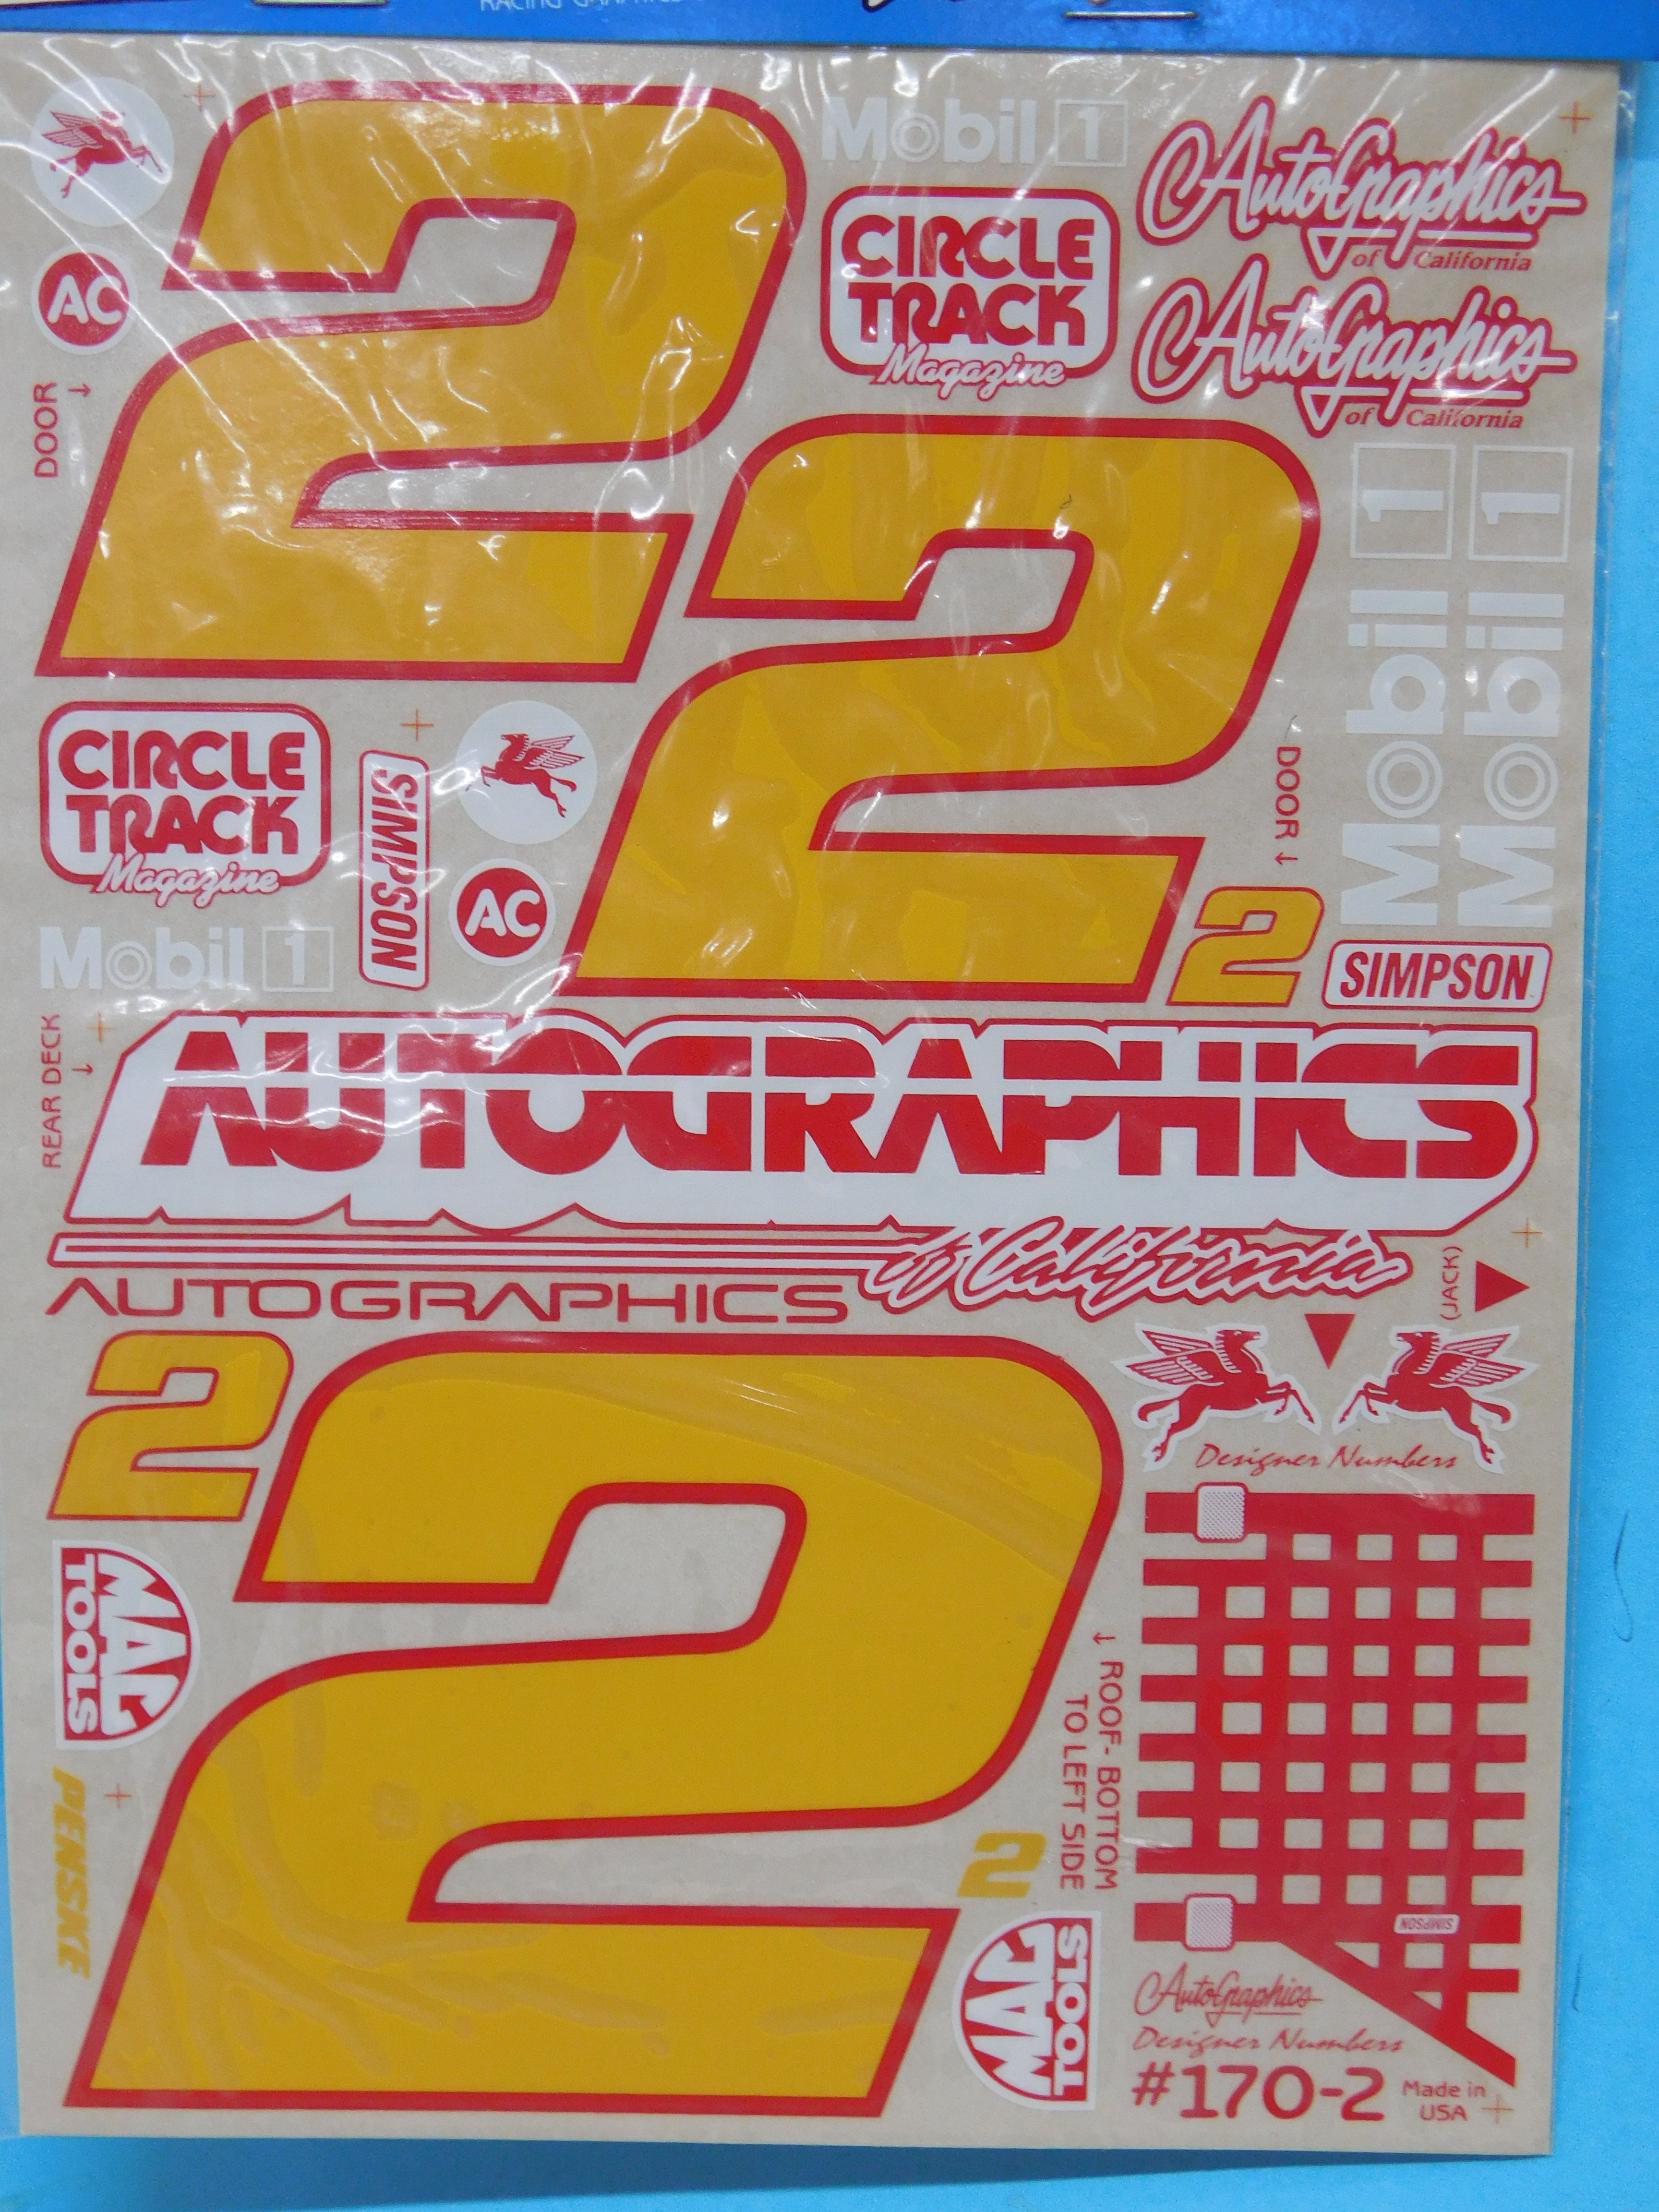 NEW VINTAGE AUTOGRAPHICS #2 CIRCLE TRACK VINYL DECAL SHEET 1/10 SCALE #170-2 NOS 